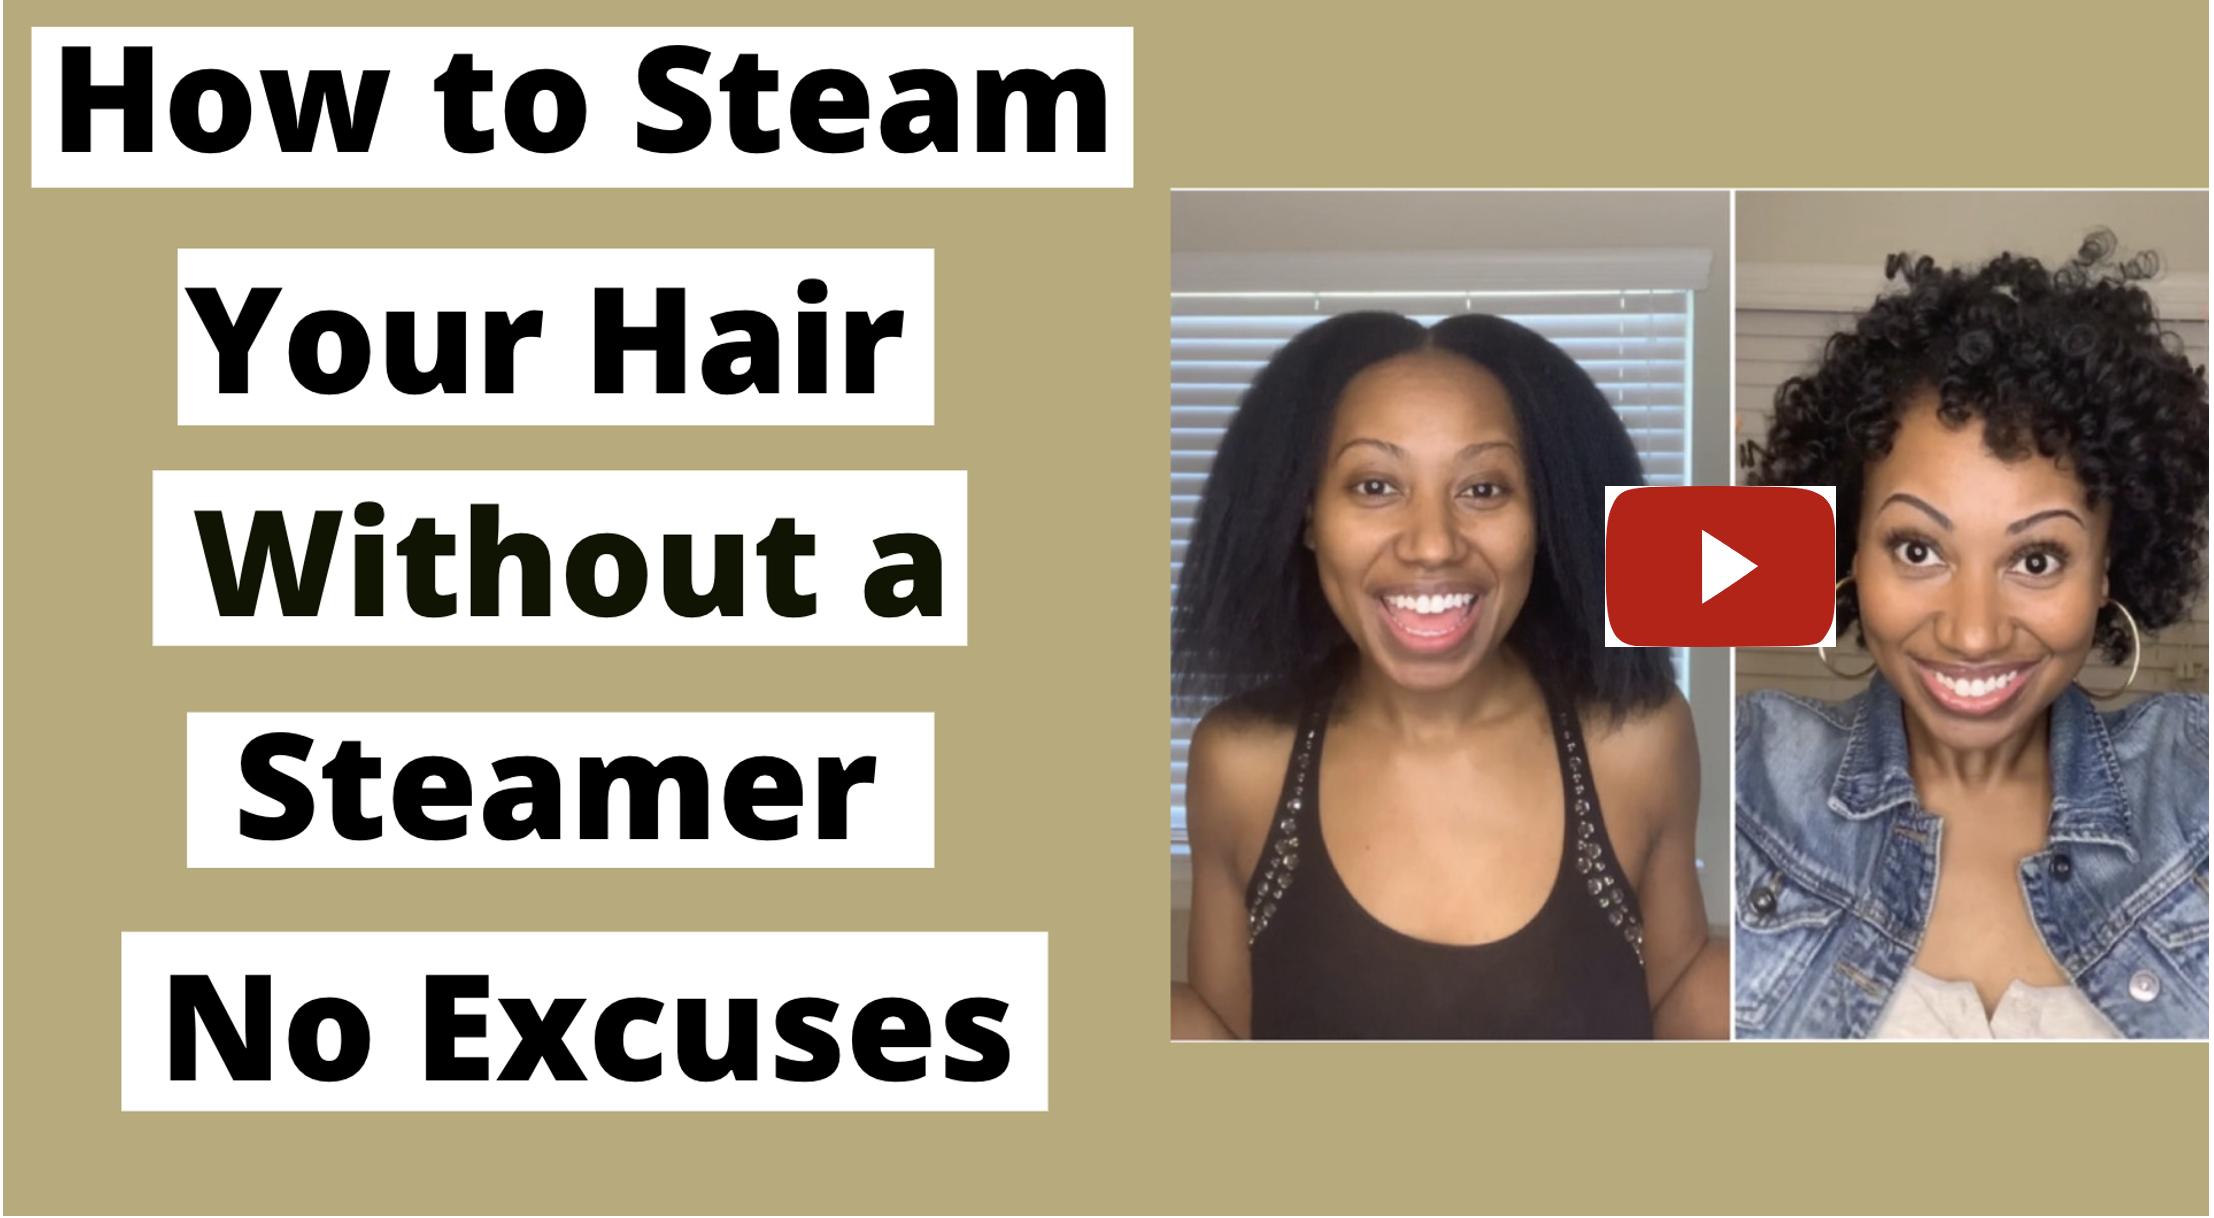 How To Steam Your Hair Without a Steamer: Video